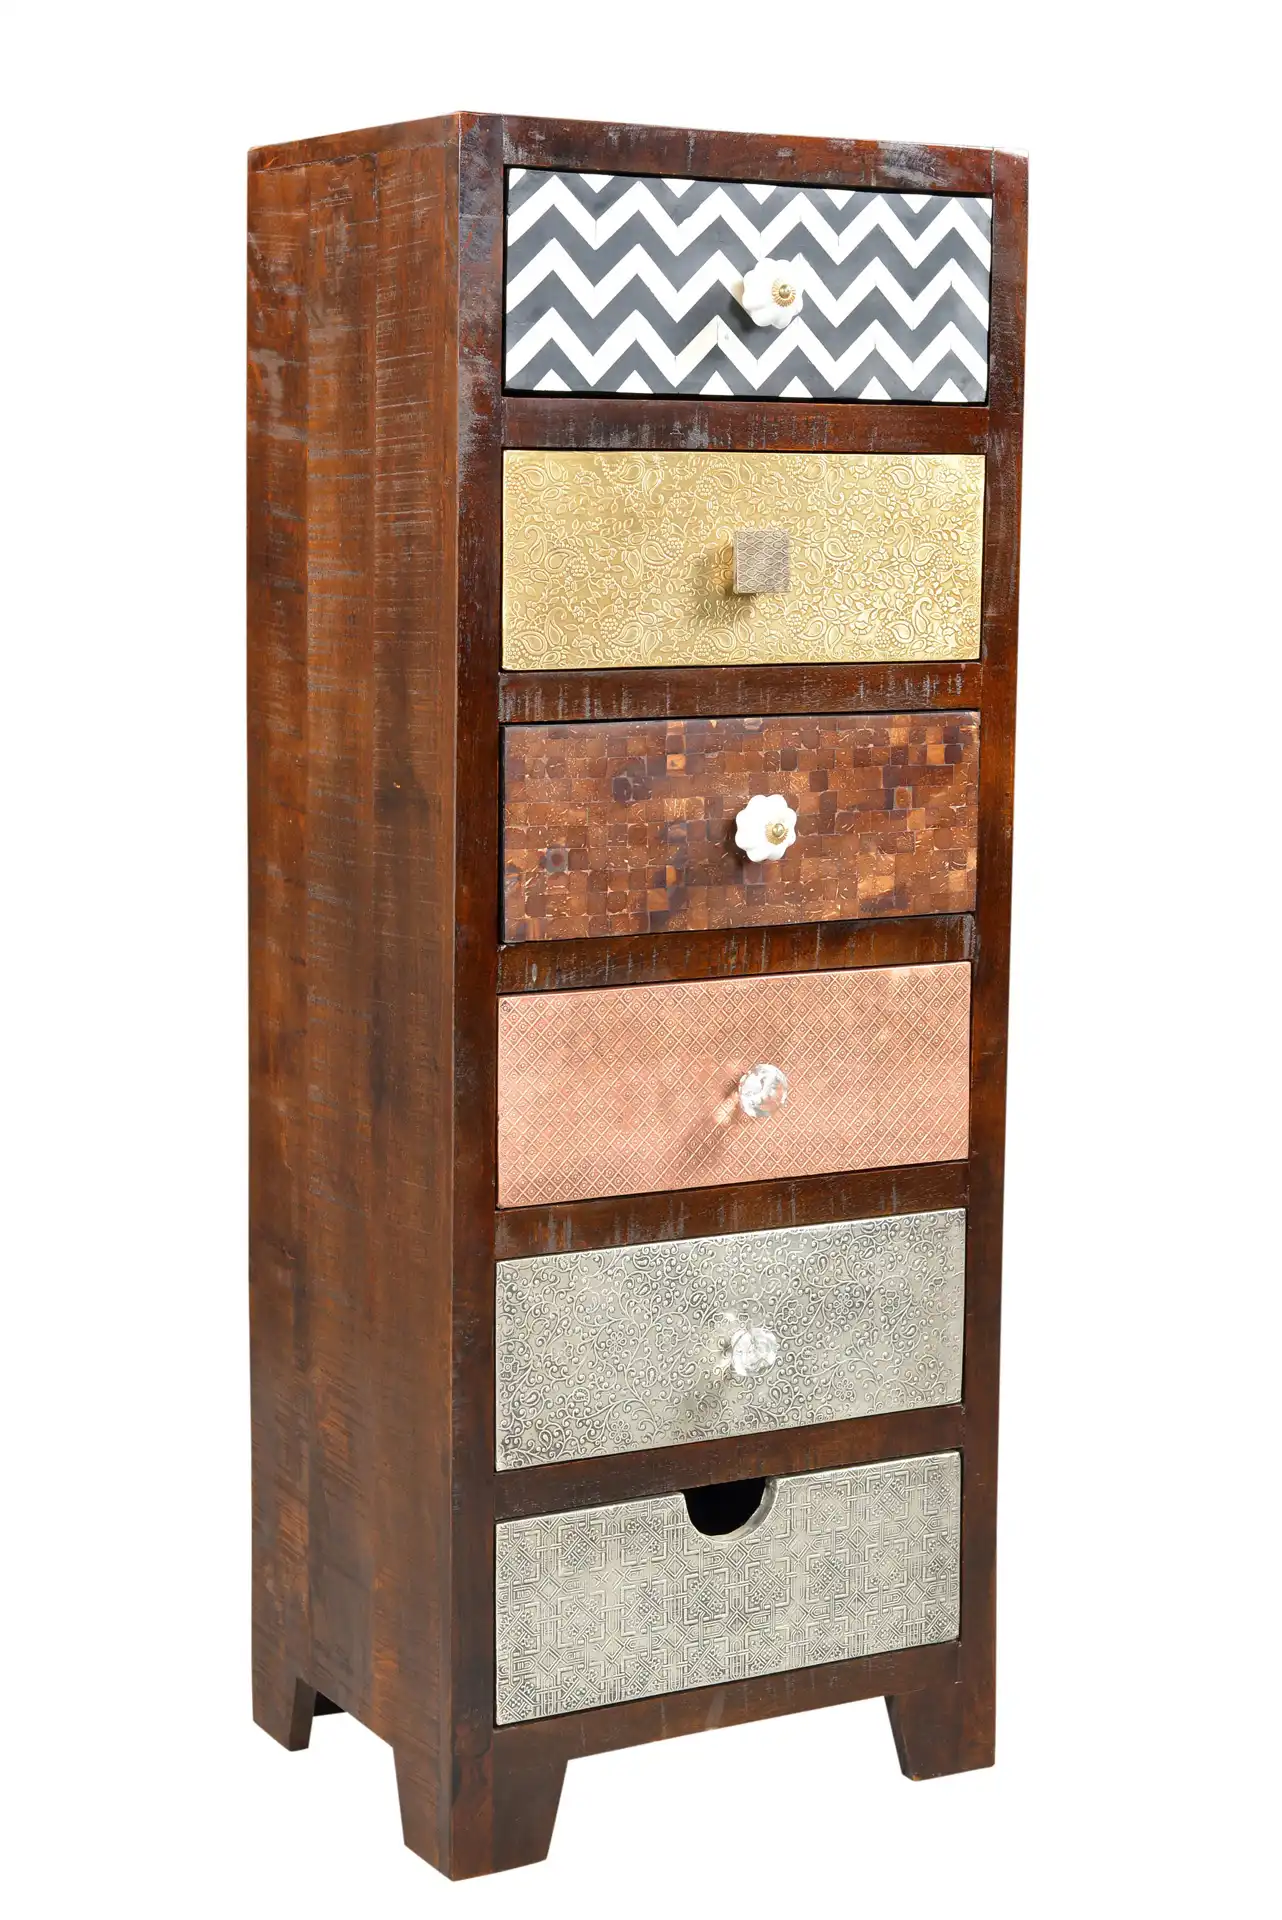 Wooden Drawer Chest with 7 Drawers - popular handicrafts